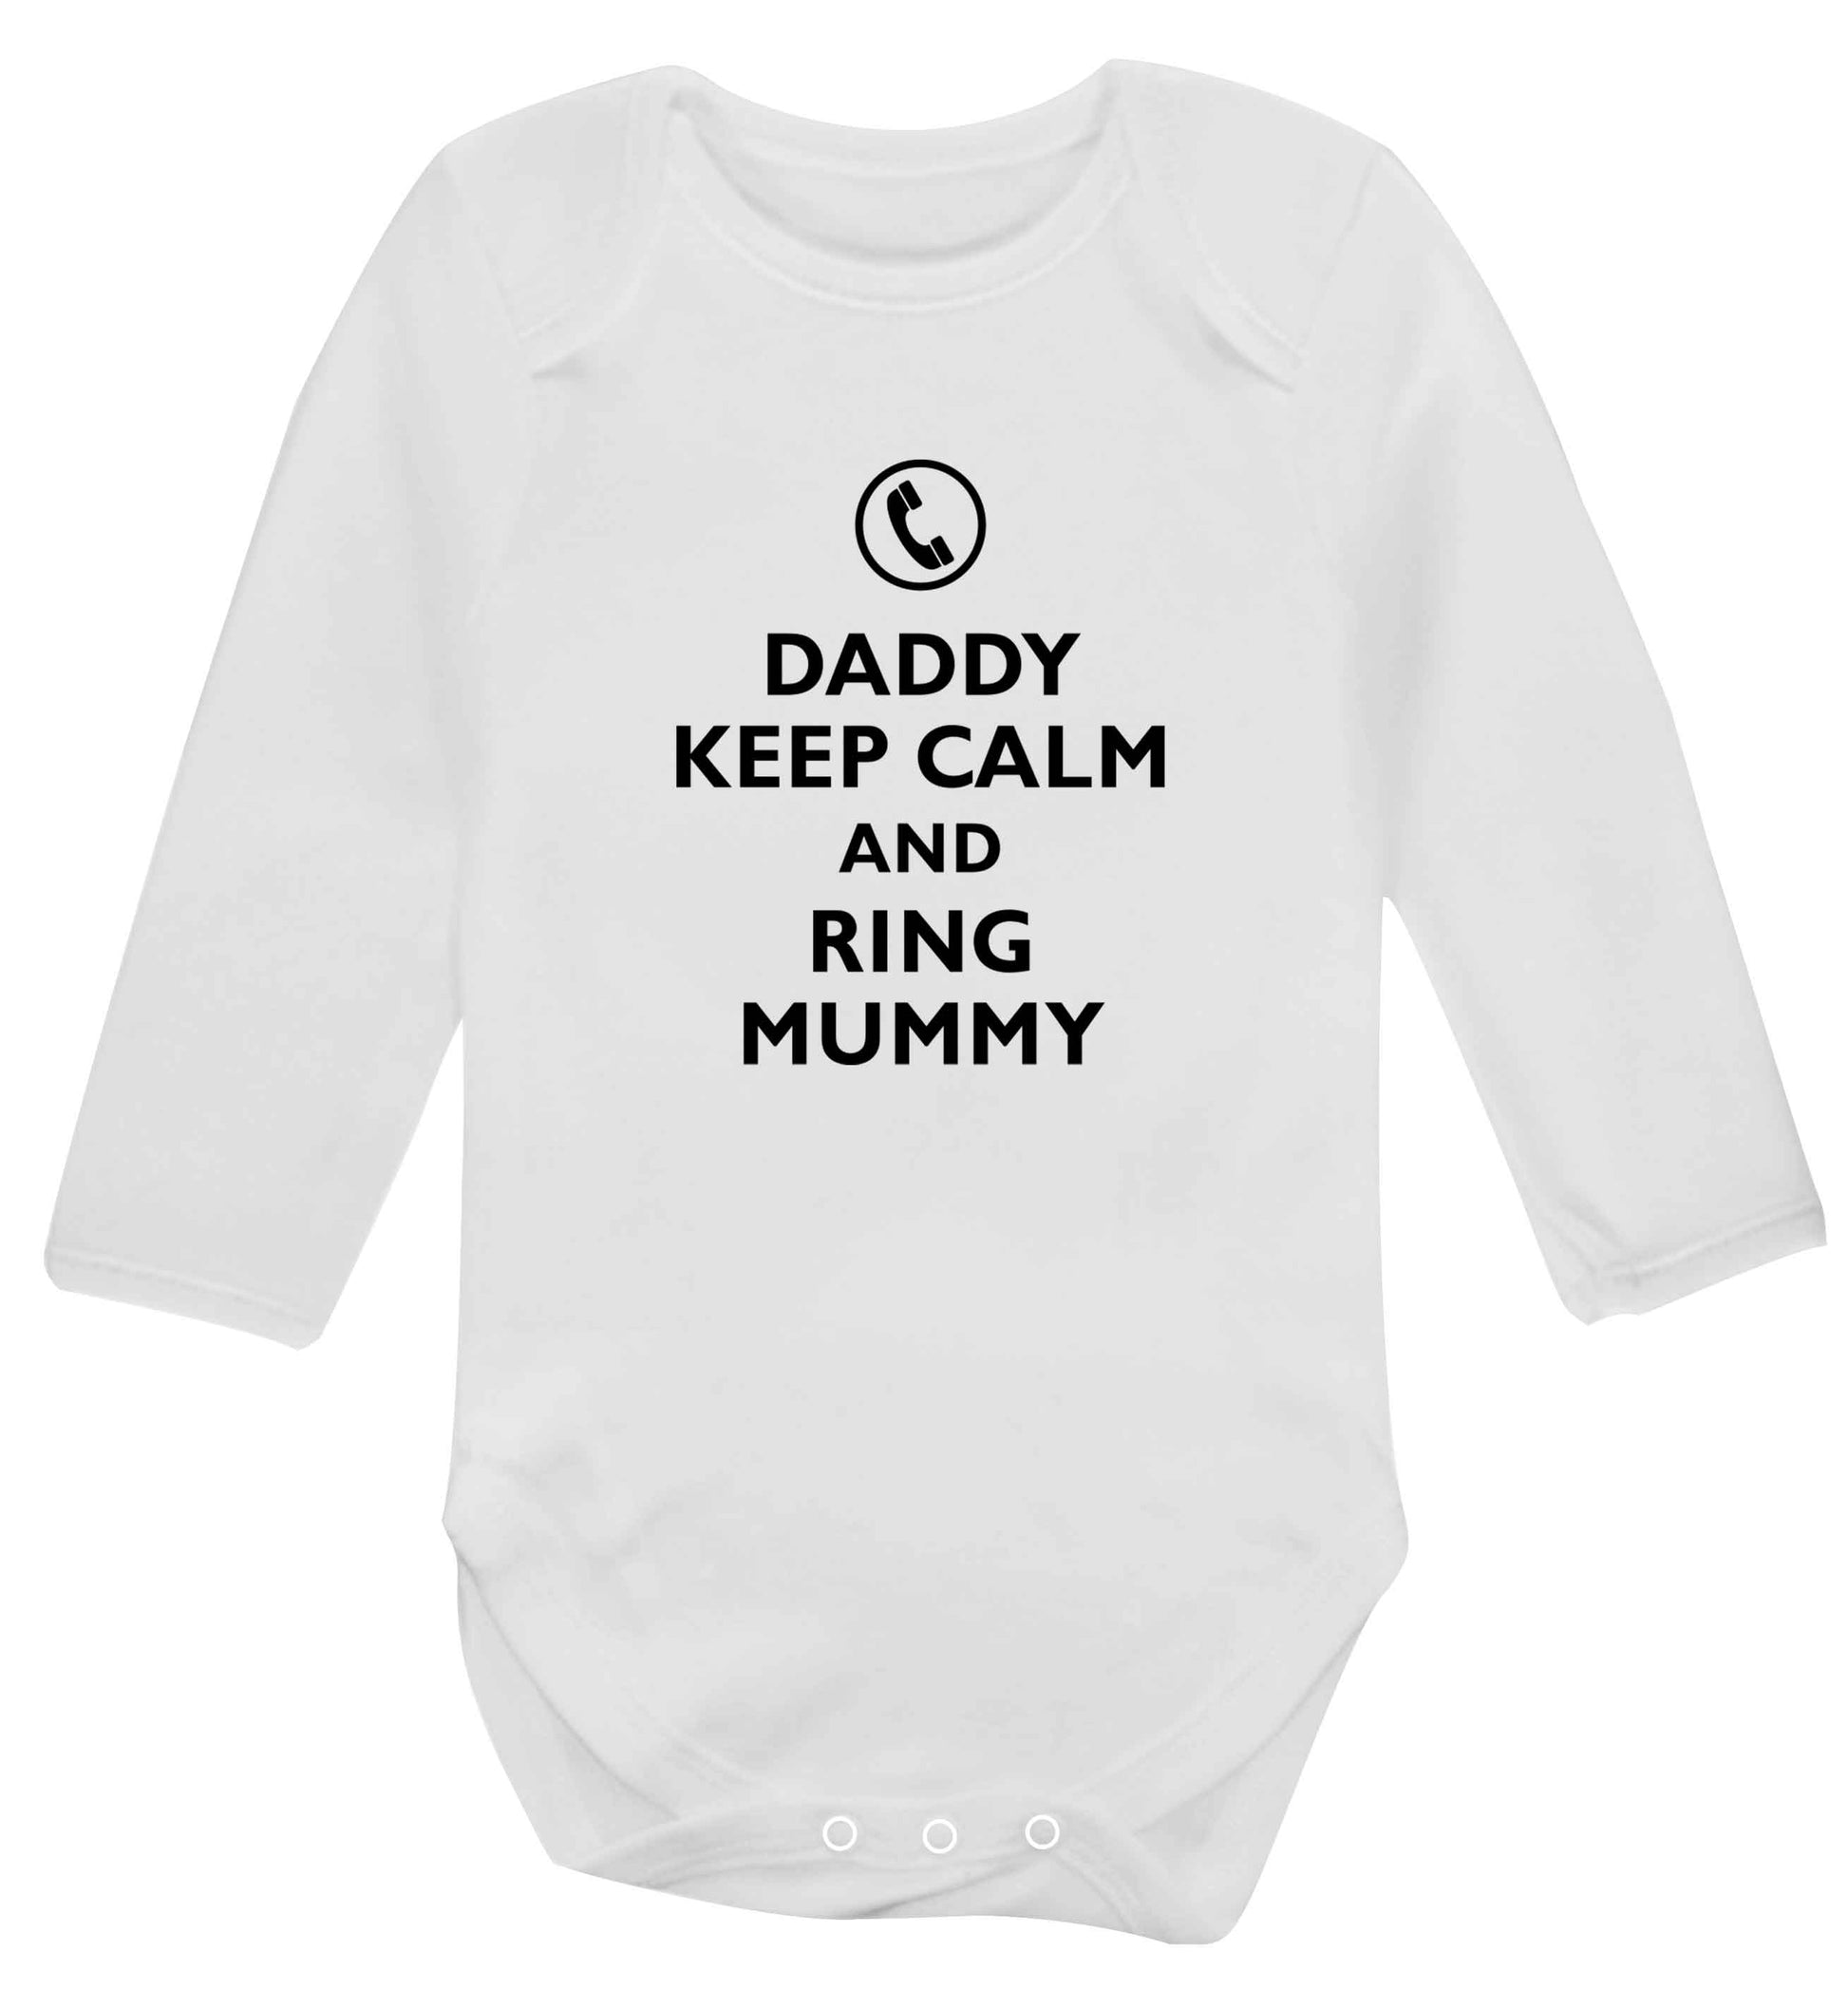 Daddy keep calm and ring mummy baby vest long sleeved white 6-12 months